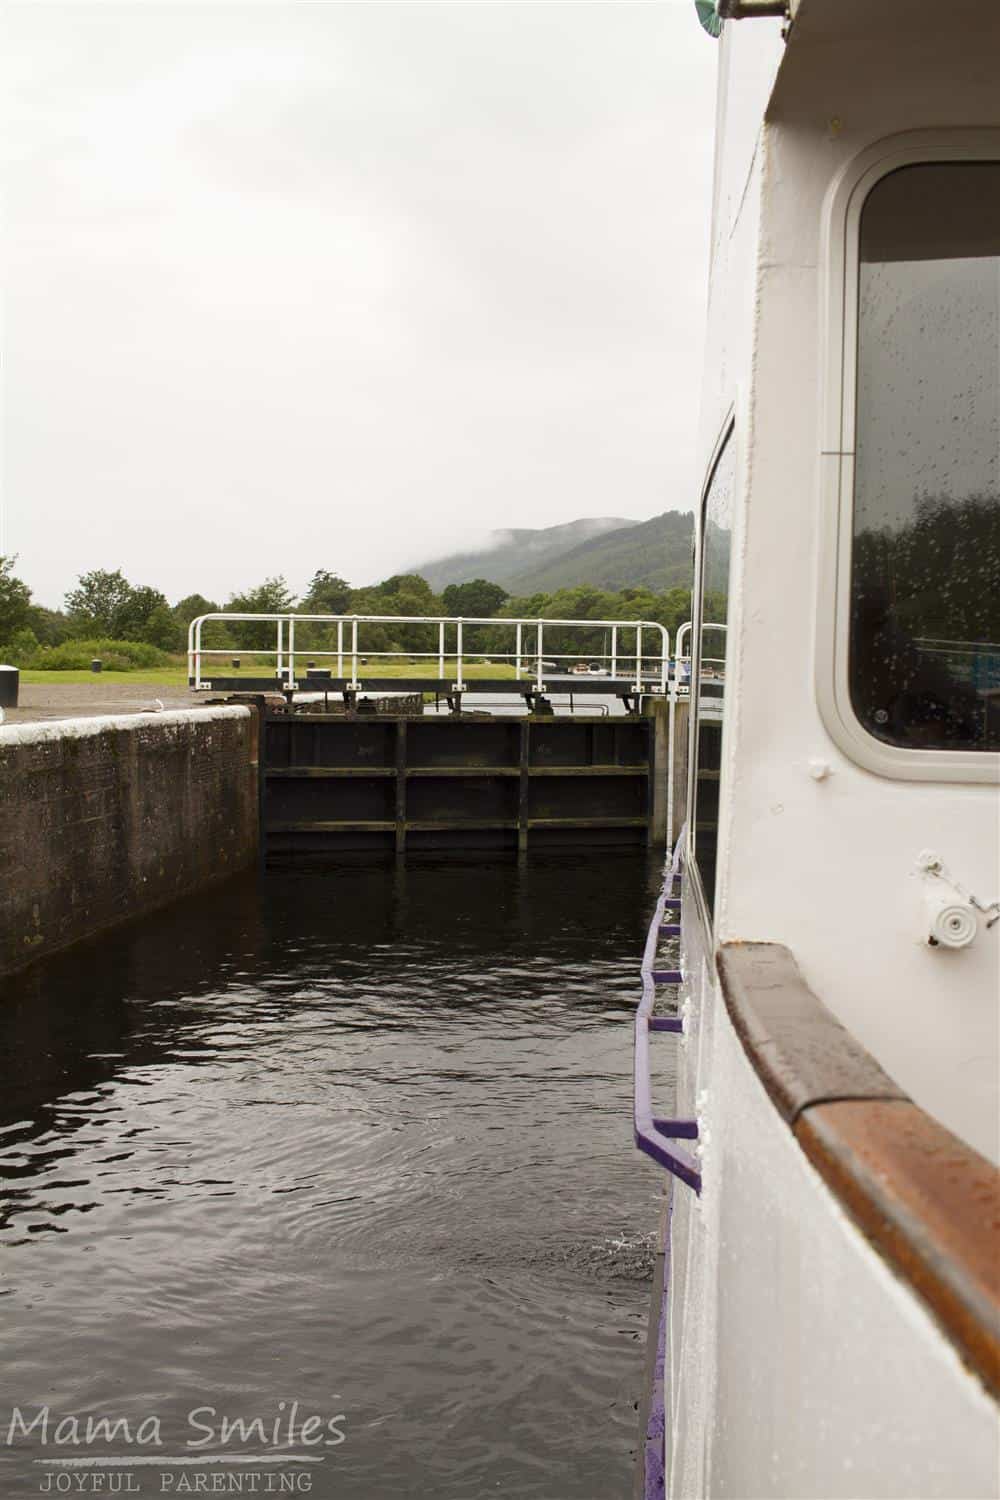 How do canal locks work? This post has all the answers, including different models to explain how they work.